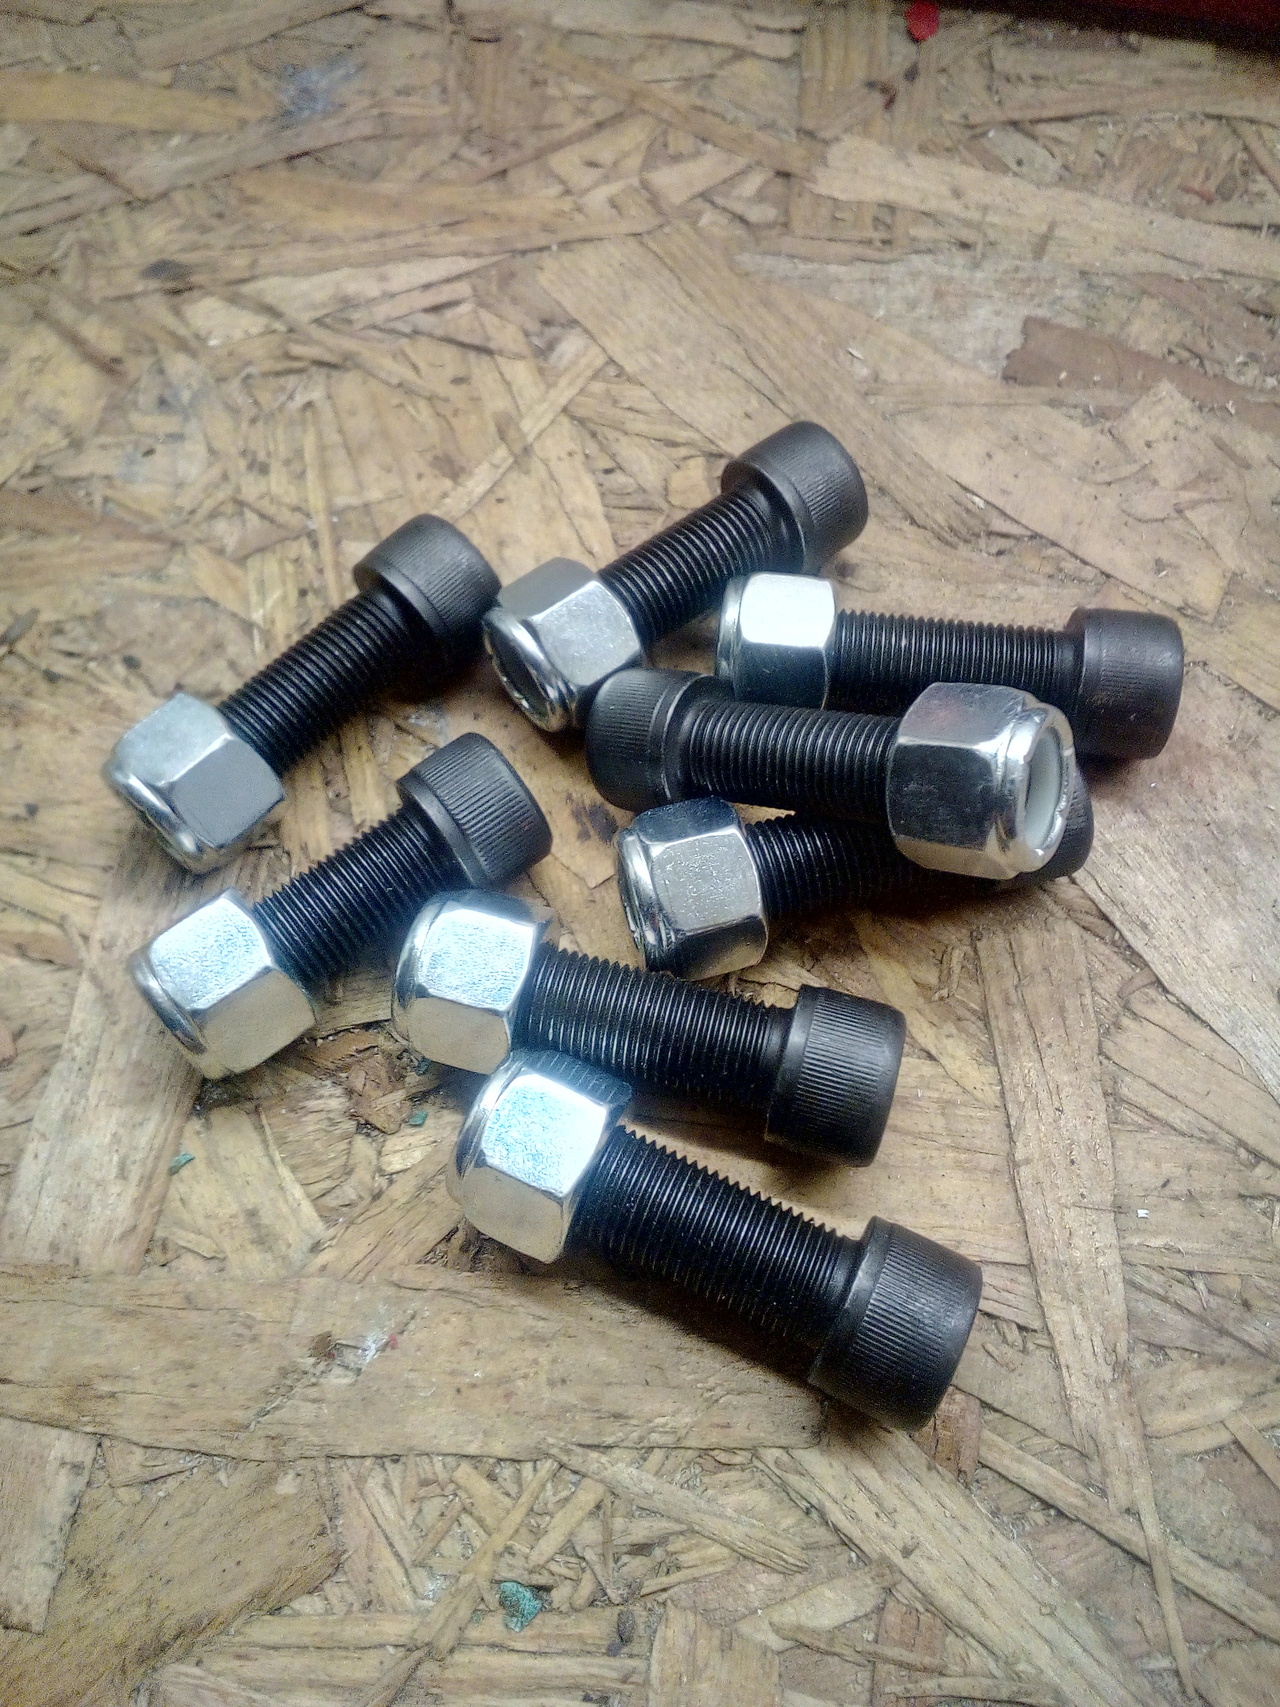 8 cap-head bolts and nyloc nuts, laying on a rough wooden bench.